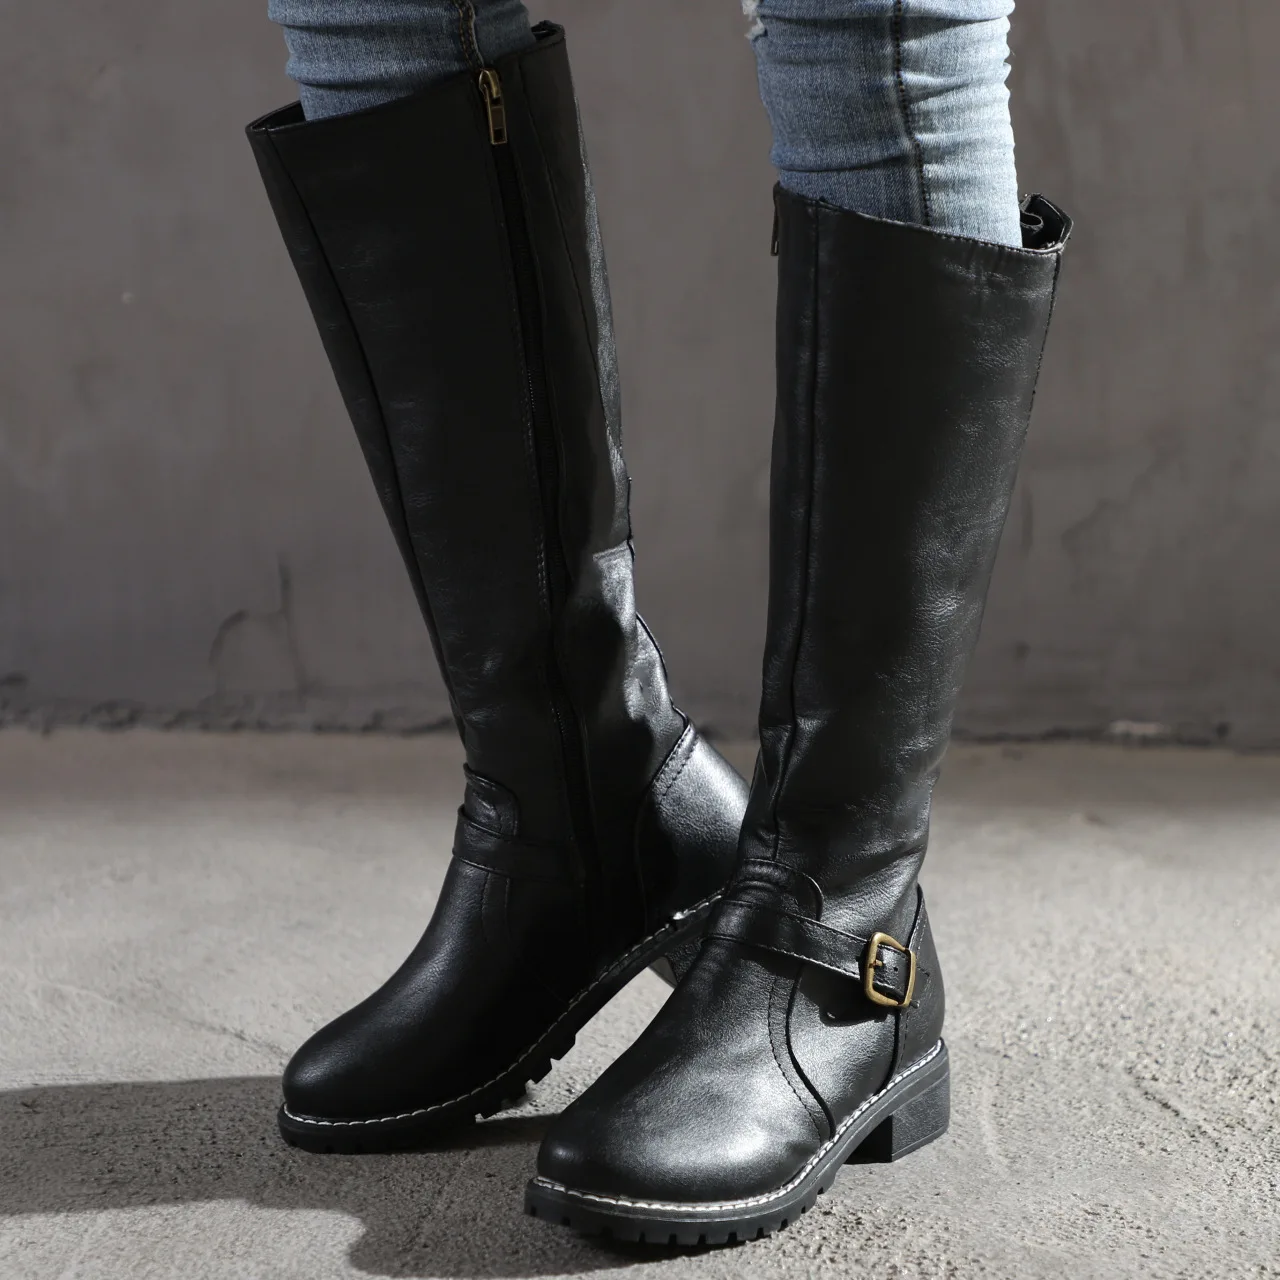 2021 fashion and temperament popular over the knee boots thigh high women boots